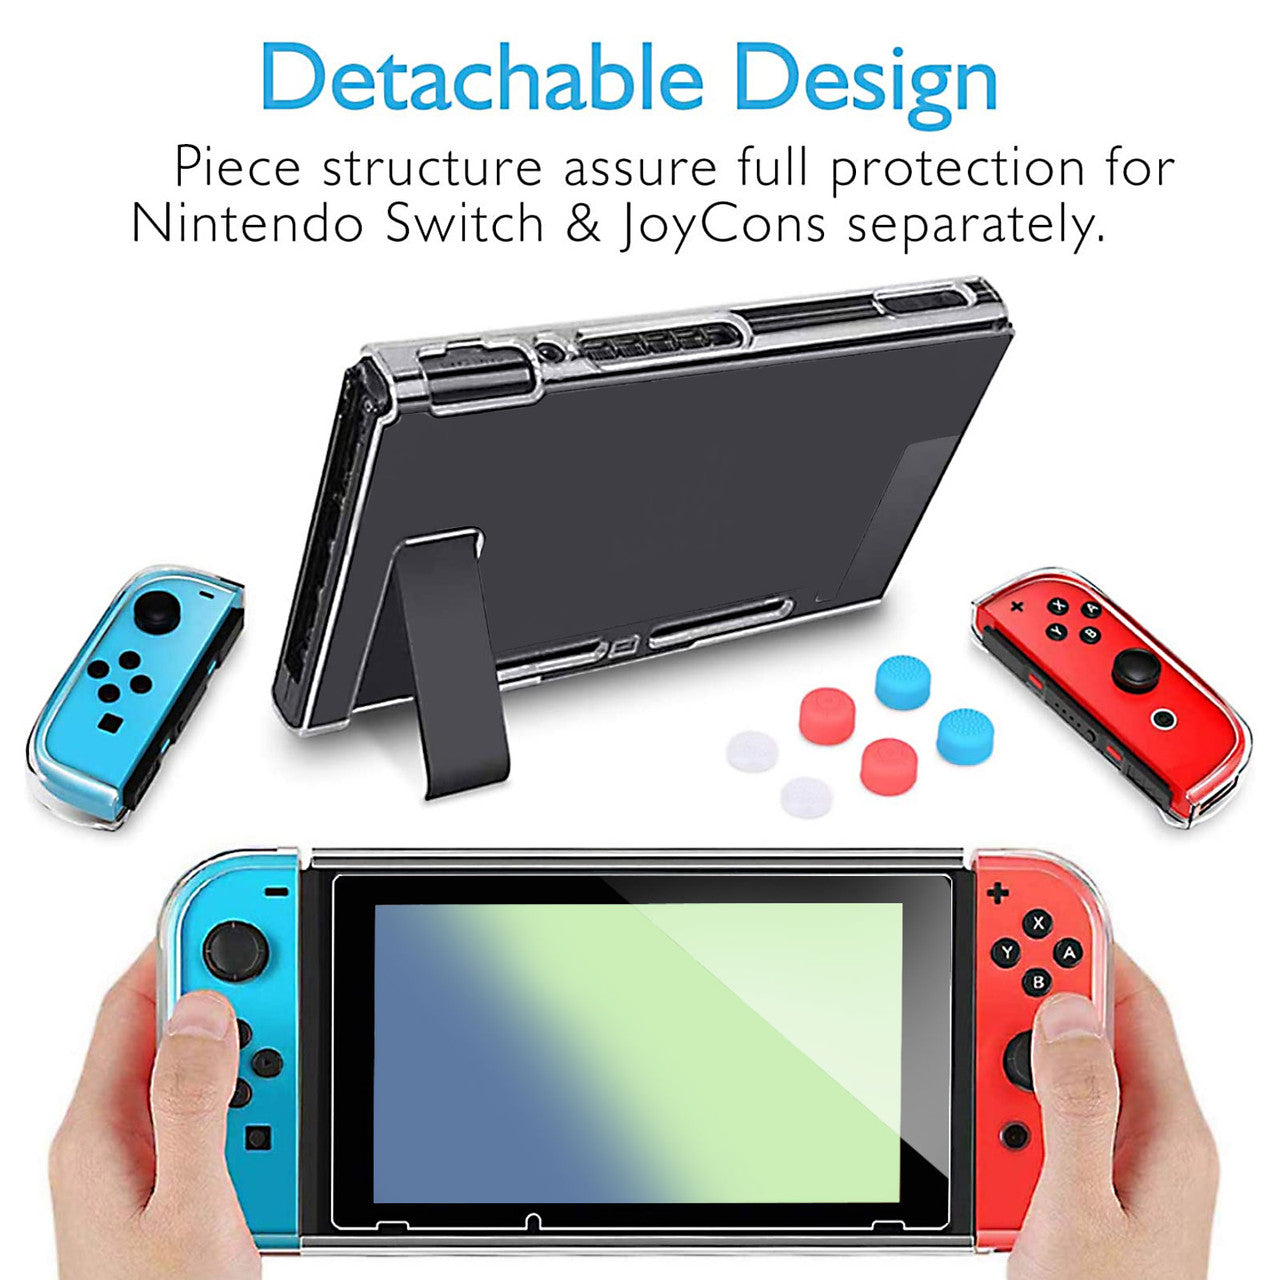 Clear Cover Case for Nintendo Switch, Dockable Protective Case + Glass Screen Protector + 8 Thumb Grip Cover Caps Accessories Fit for Nintendo Switch and Joy-Con, Anti-scratch Switch Accessories Kit